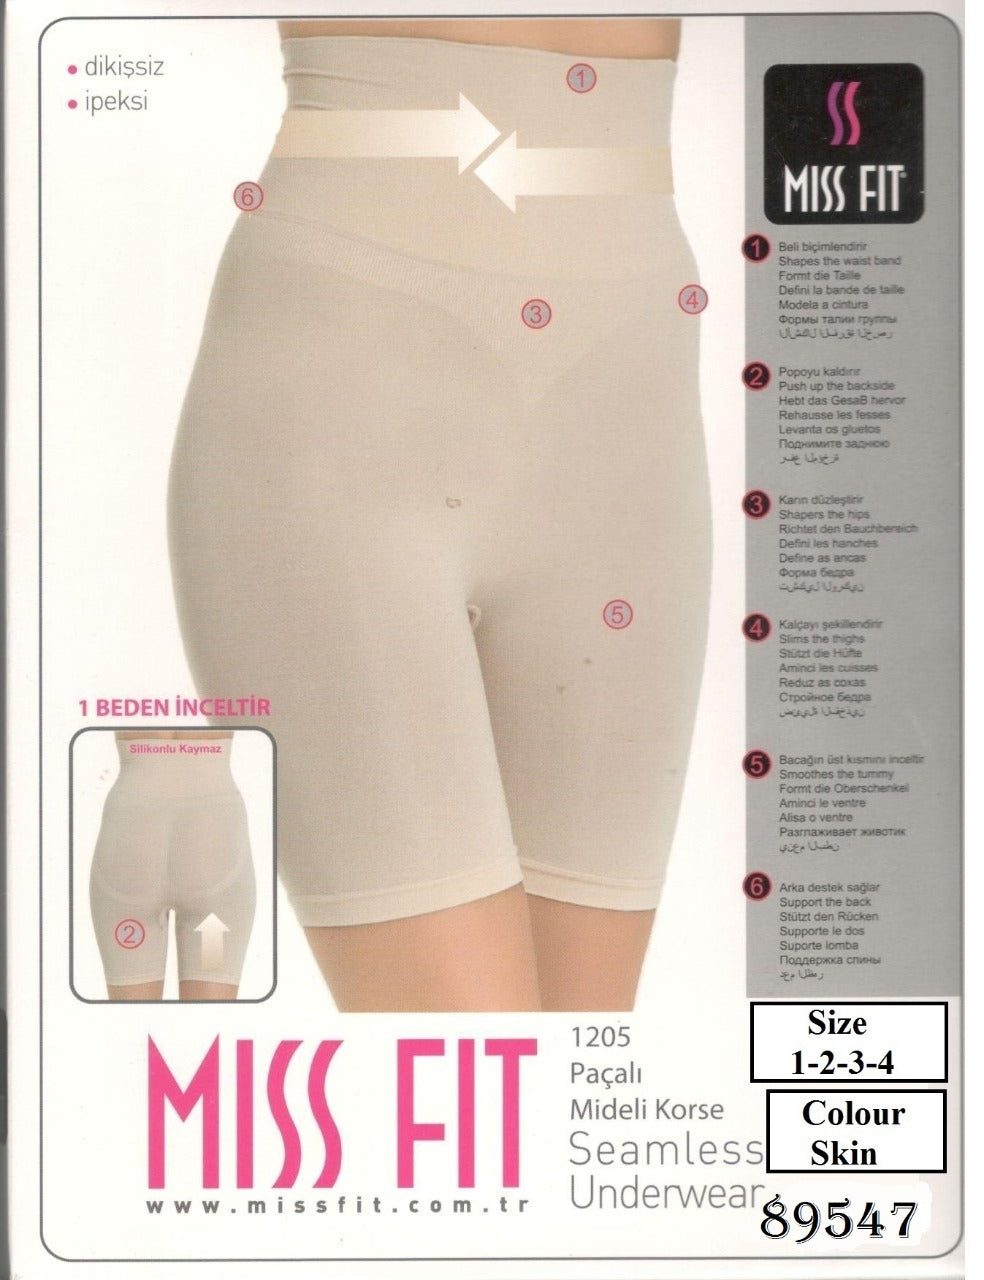 LINGERIE LOUNGE - Miss Fit, Cuff Girdle, Seamless Body Shaper